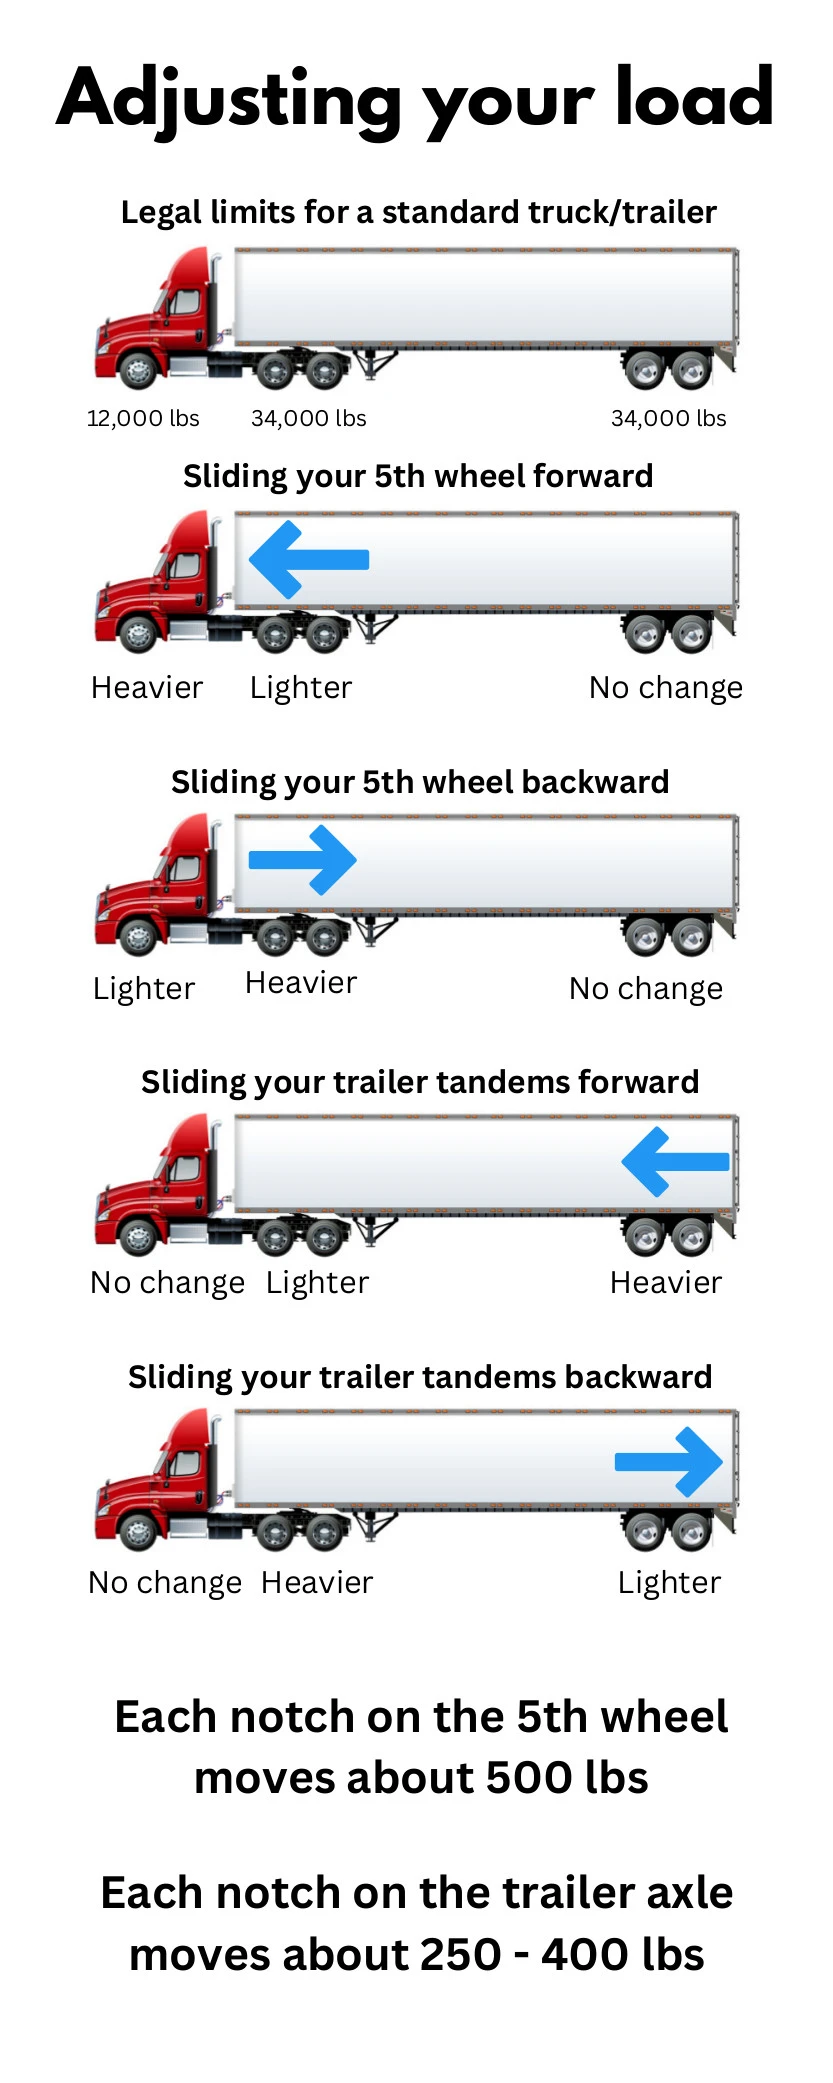 Infographic on how to adjust truck weight by sliding the 5th wheel and trailer tandems